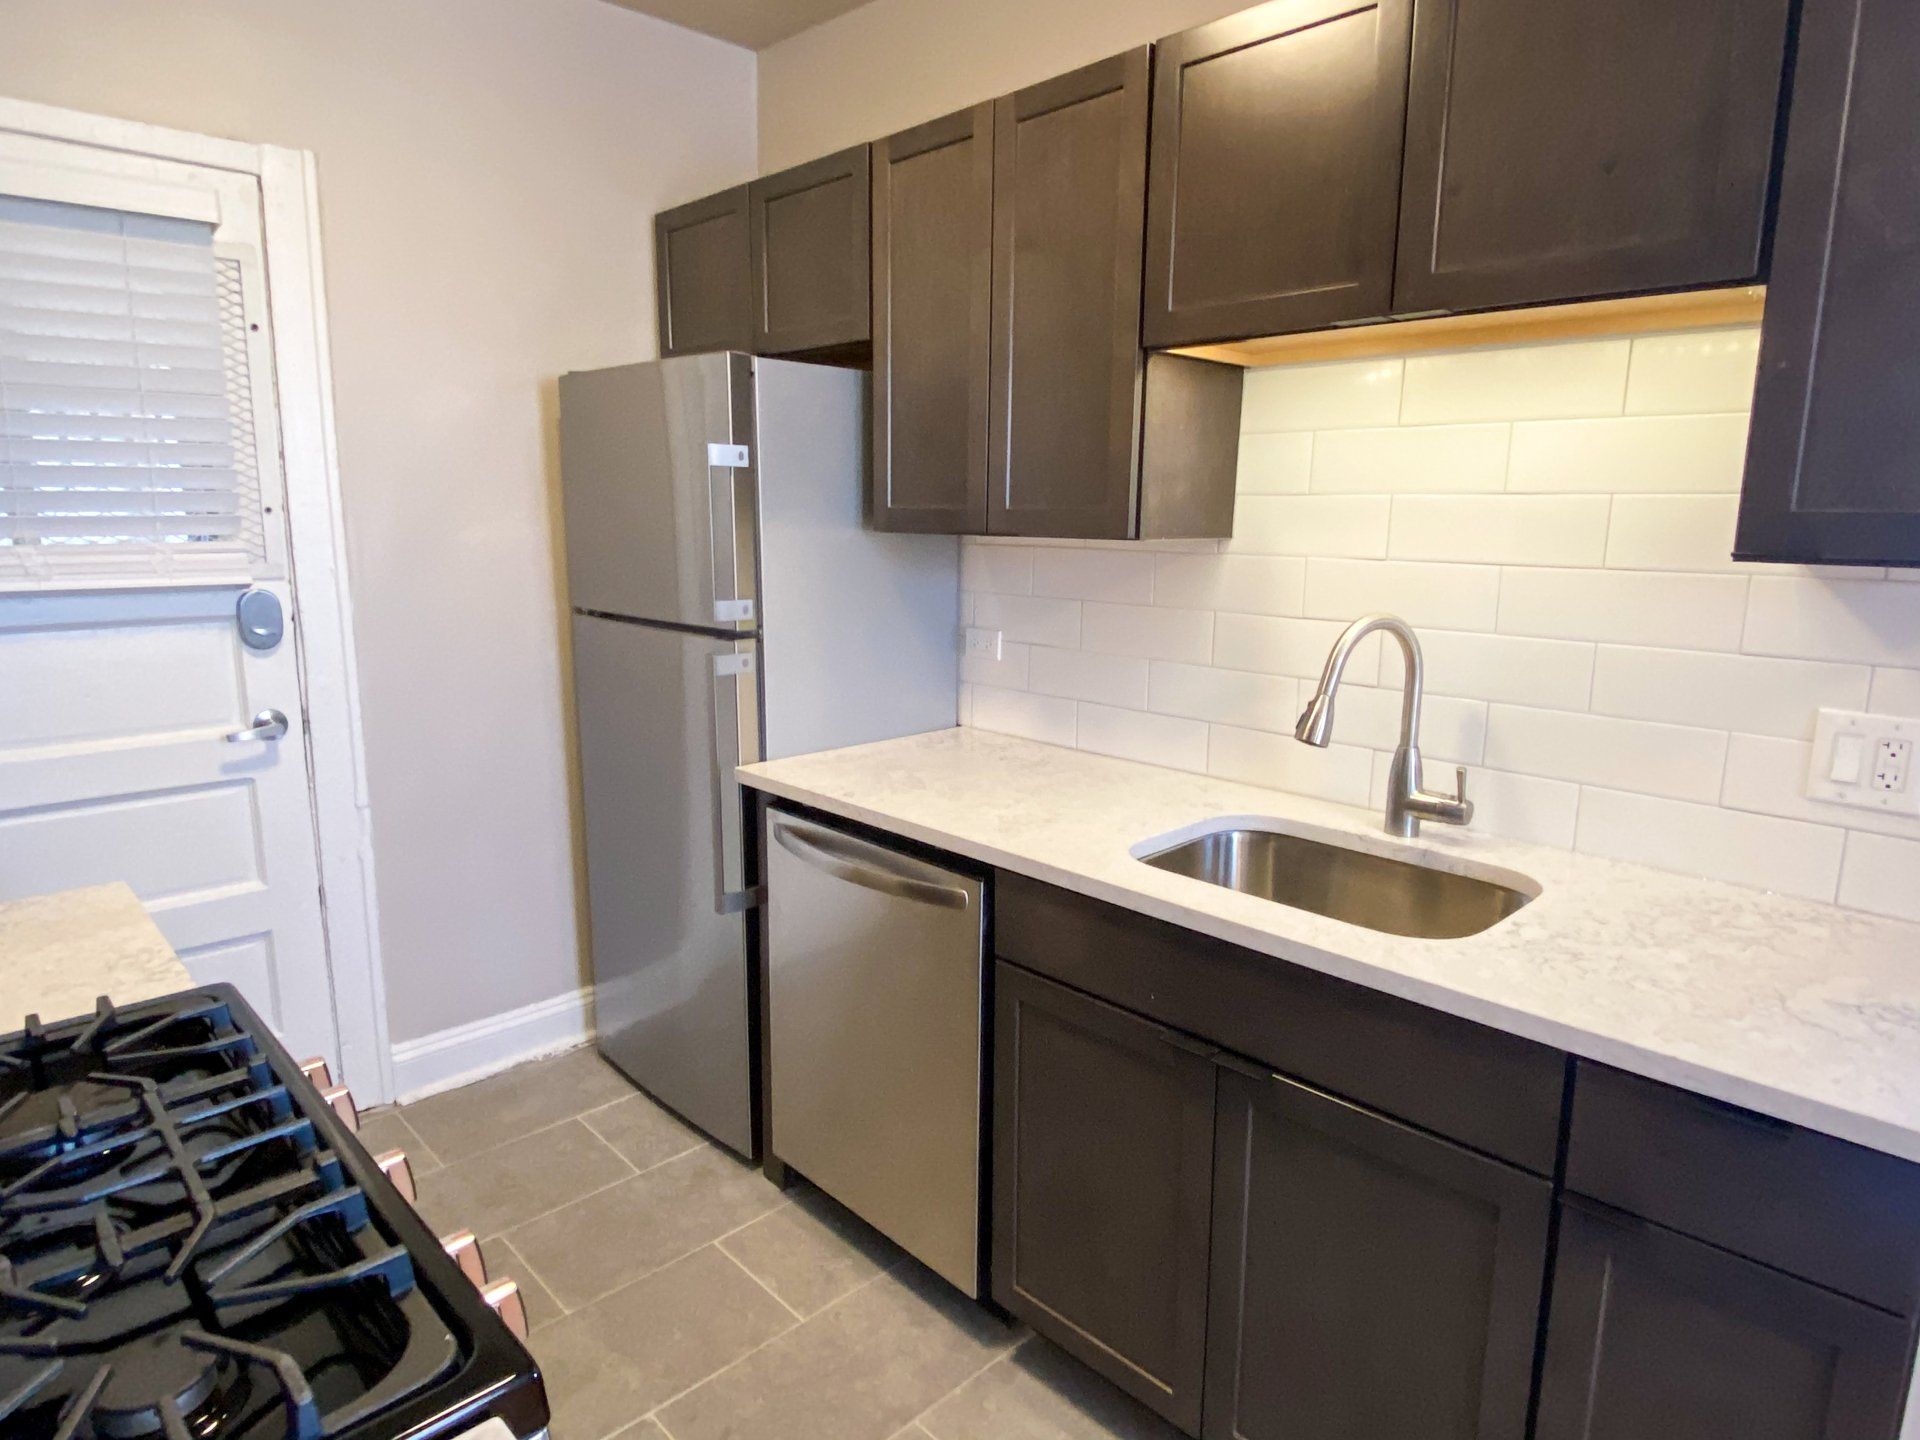 A modern apartment kitchen with a stove, refrigerator, sink, and dishwasher at Reside at 849.